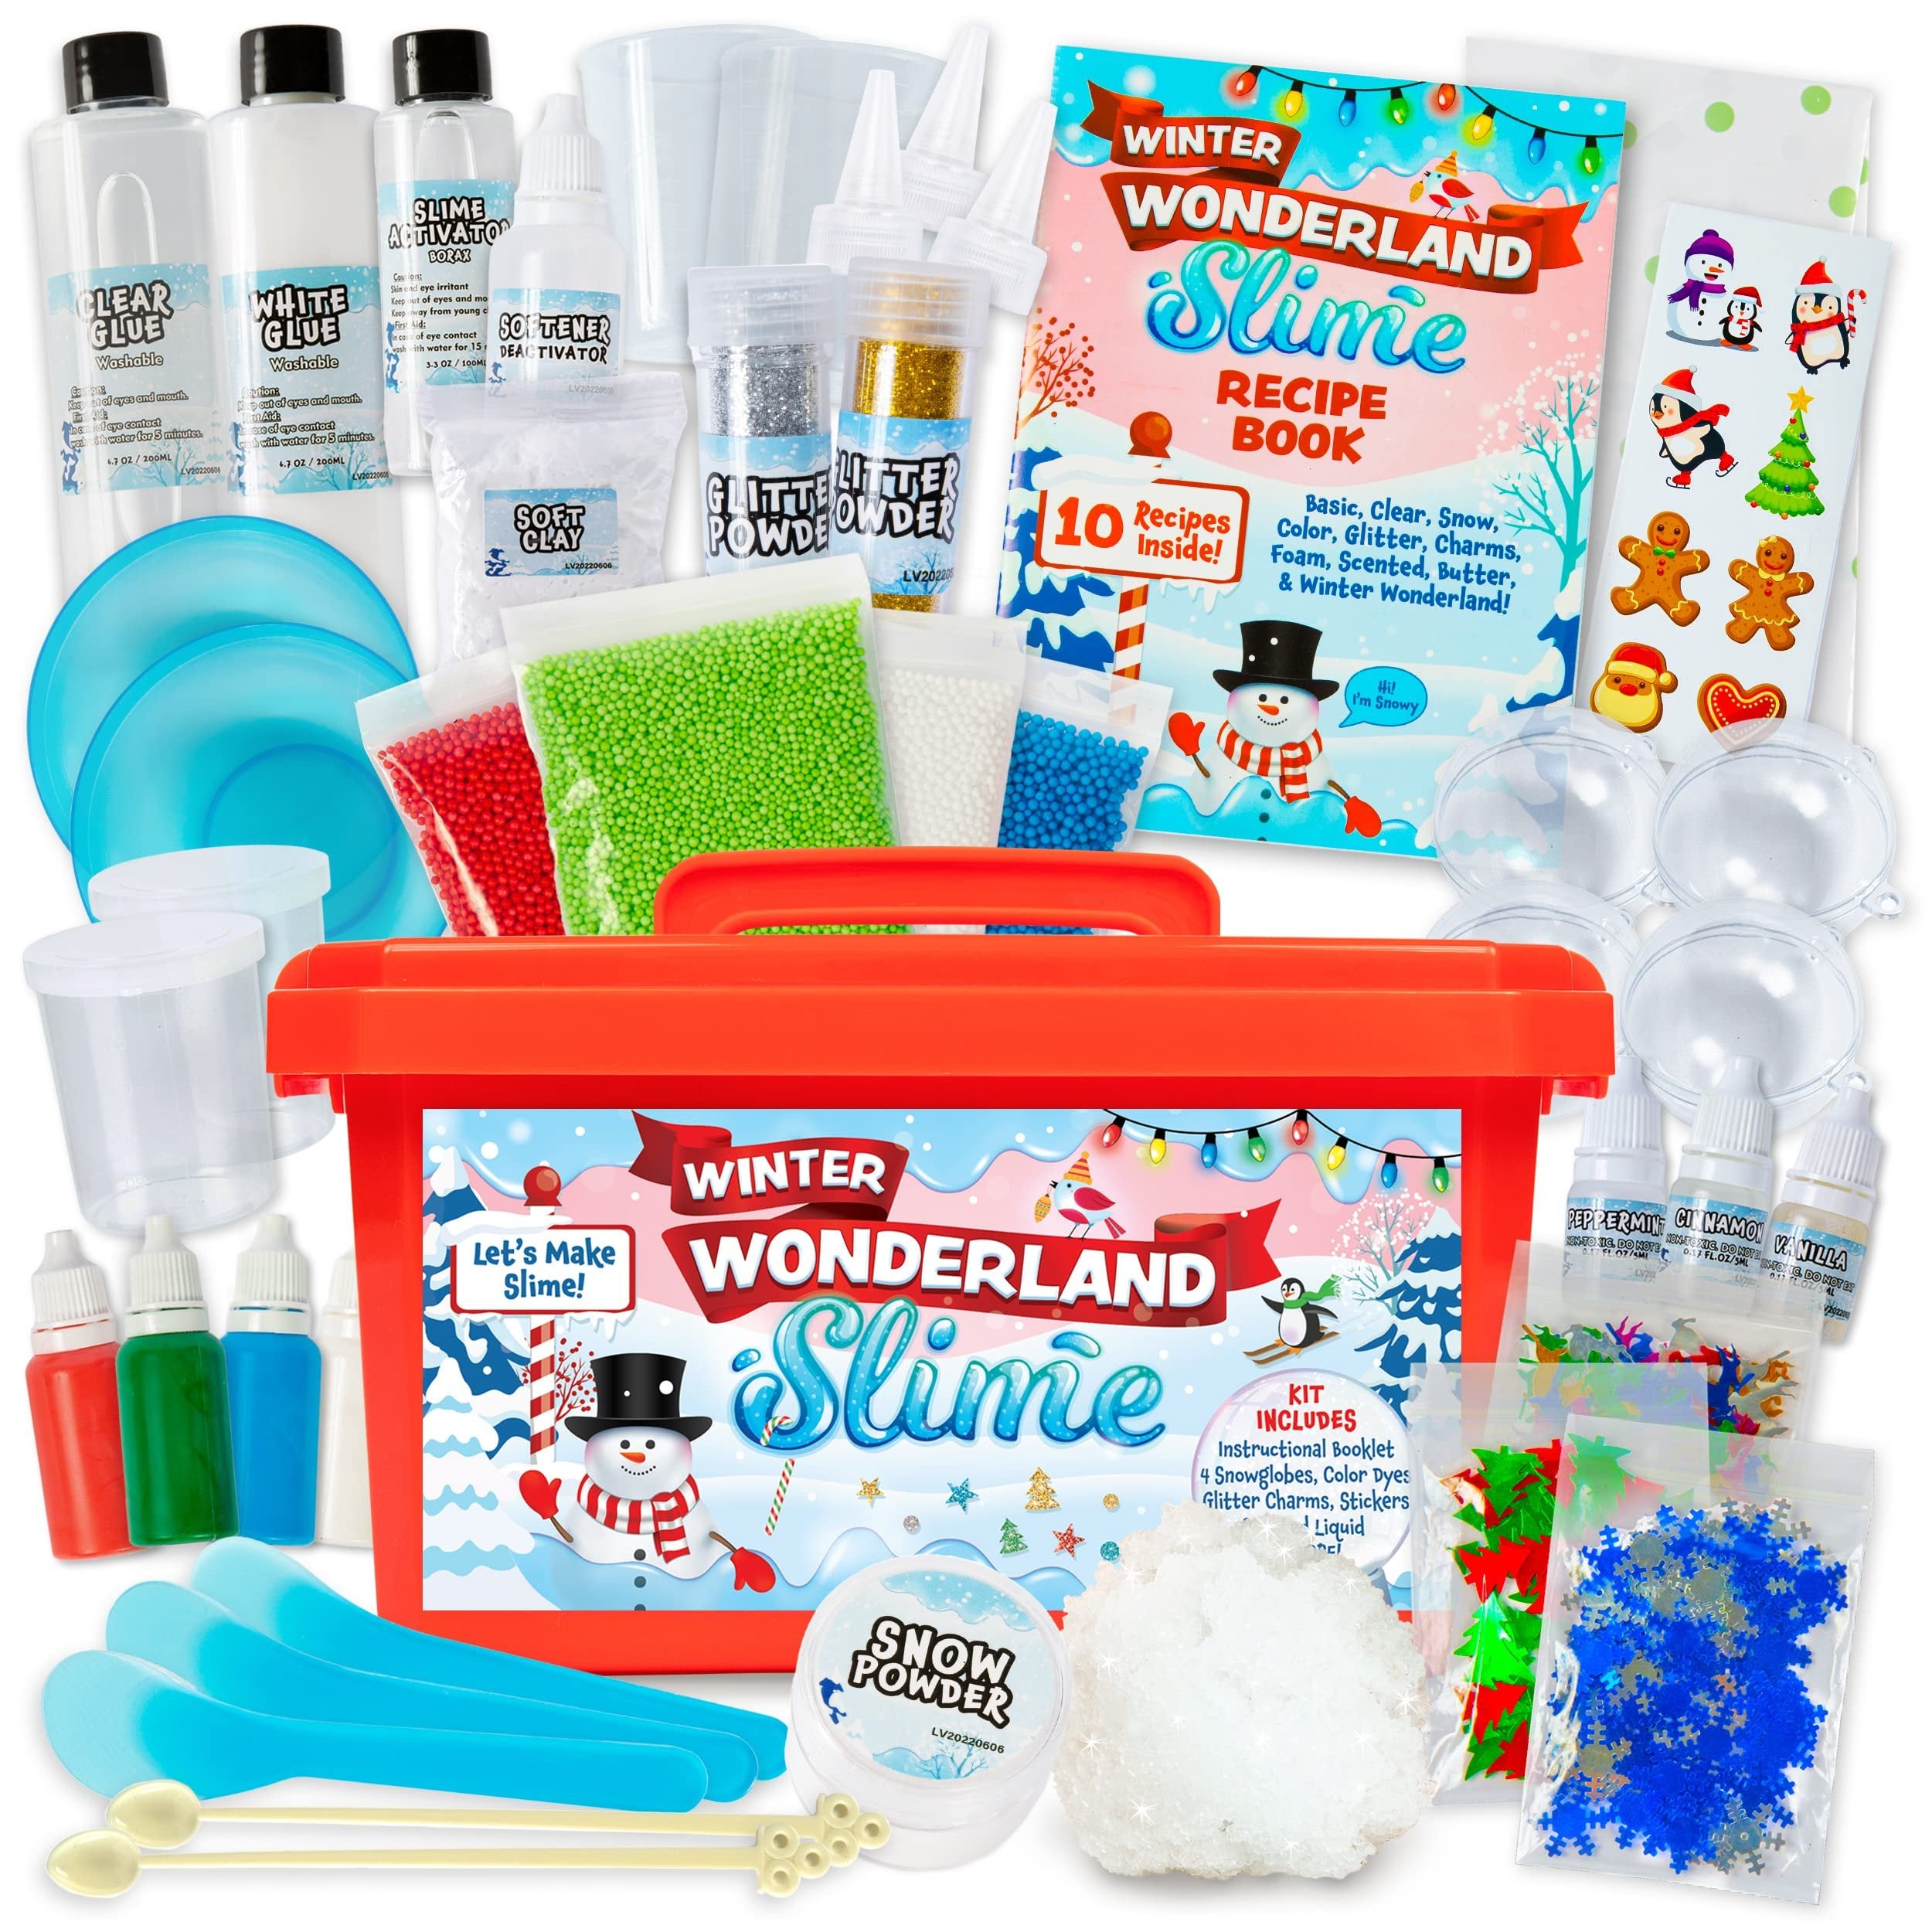 Laevo Winter Wonderland Slime Kit, Slime Kits for Girls and Boys, DIY Make Your Own Slime Set: Cloud, Butter, Scented, Clear & More - Slime Kit for Kids, Boys, Girls - Slime Supplies for 3+ Years Old